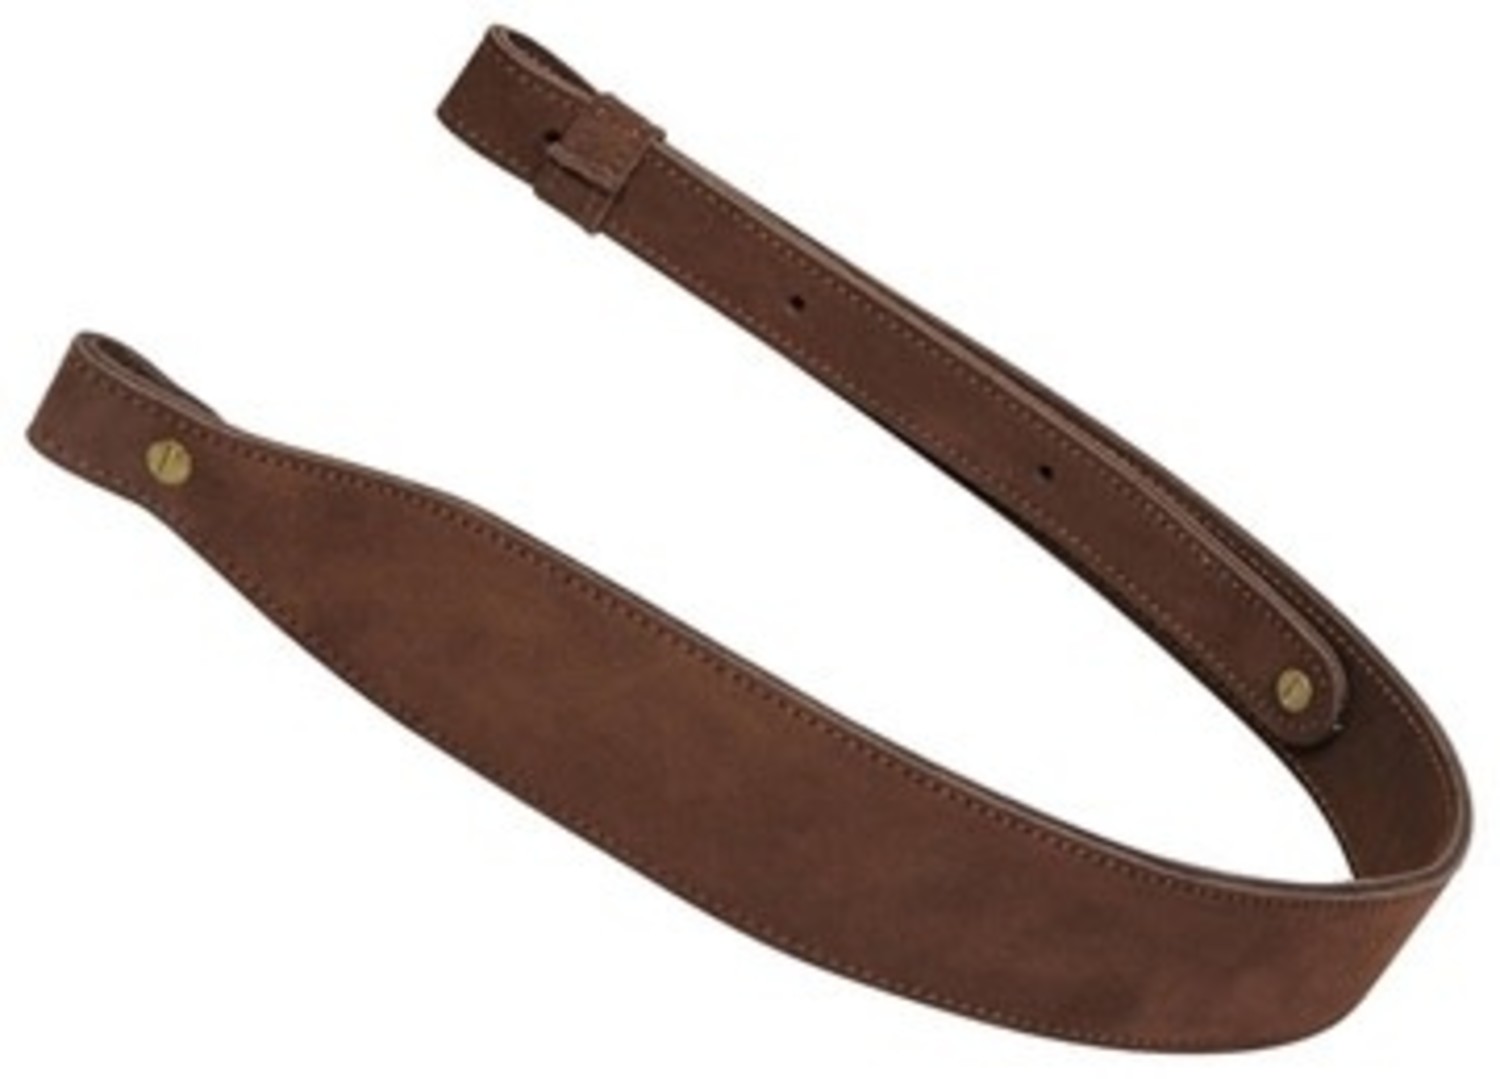 Levy's Leathers Braided Leather Rifle Sling with Suede Backing, 31-35,  Walnut & Green #SN7BS-WAL/GRN - Al Flaherty's Outdoor Store